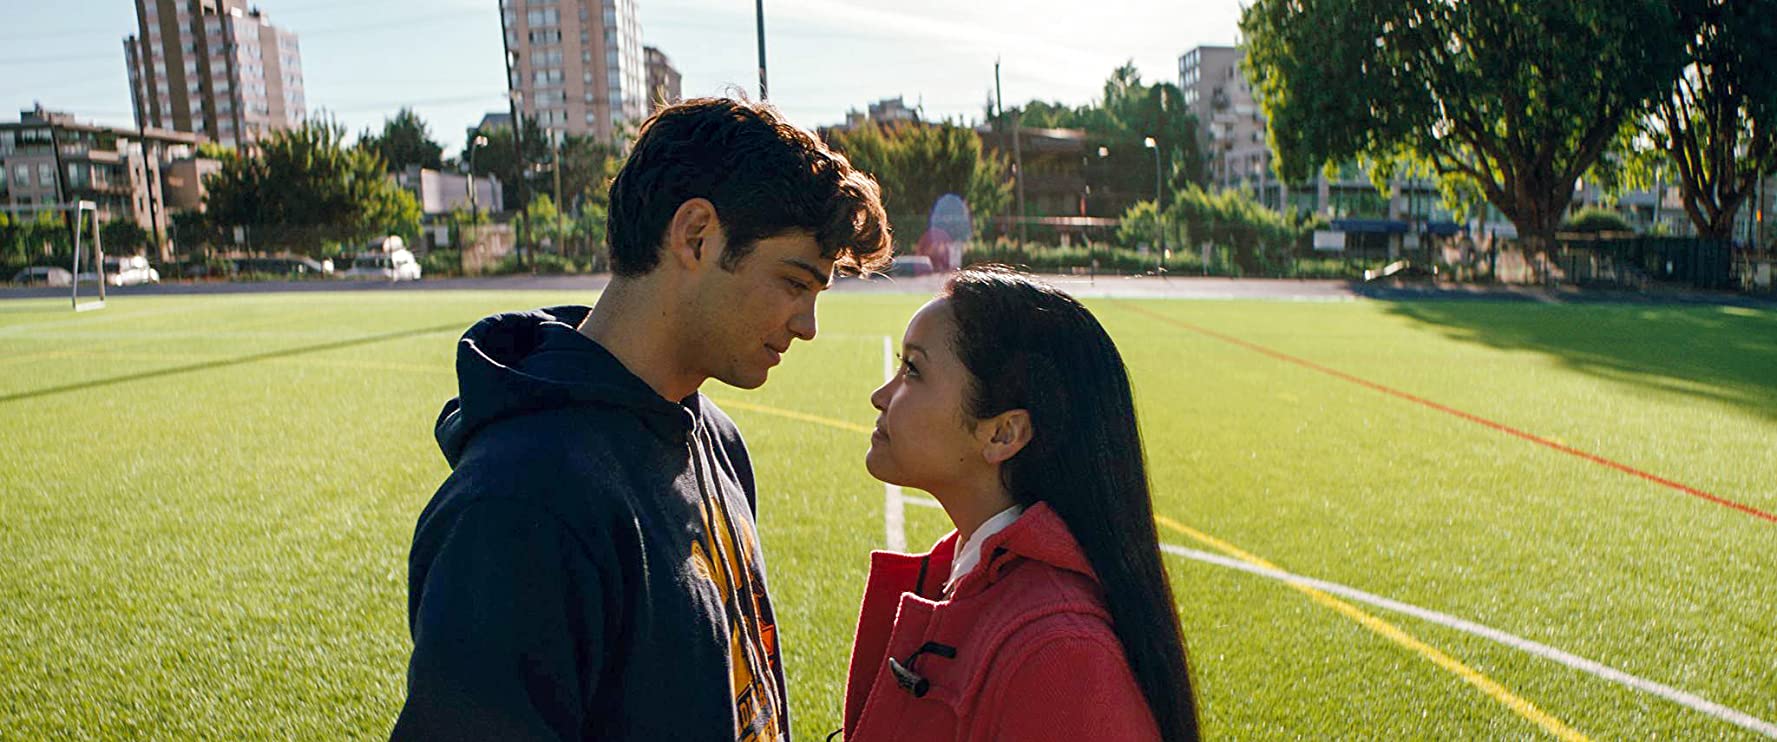 Review To All the Boys I've Loved Before (2018)